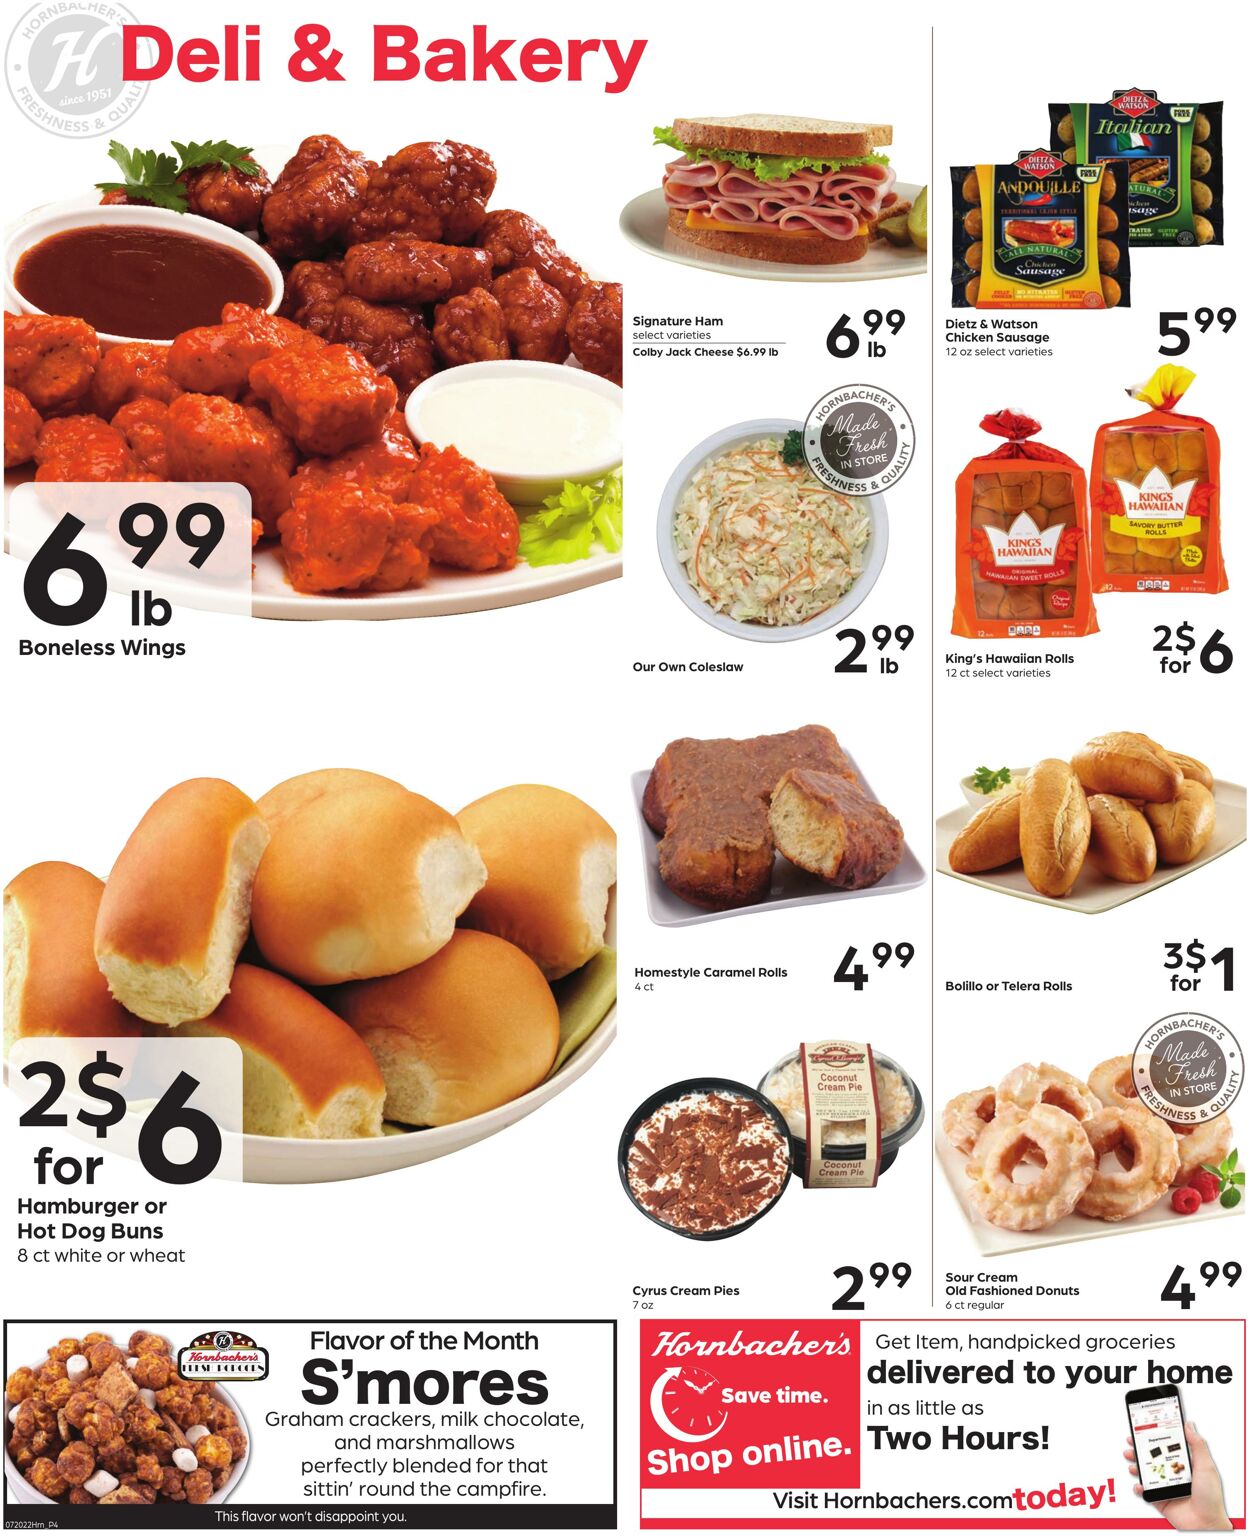 Weekly ad Hornbacher's 07/20/2022 - 07/26/2022